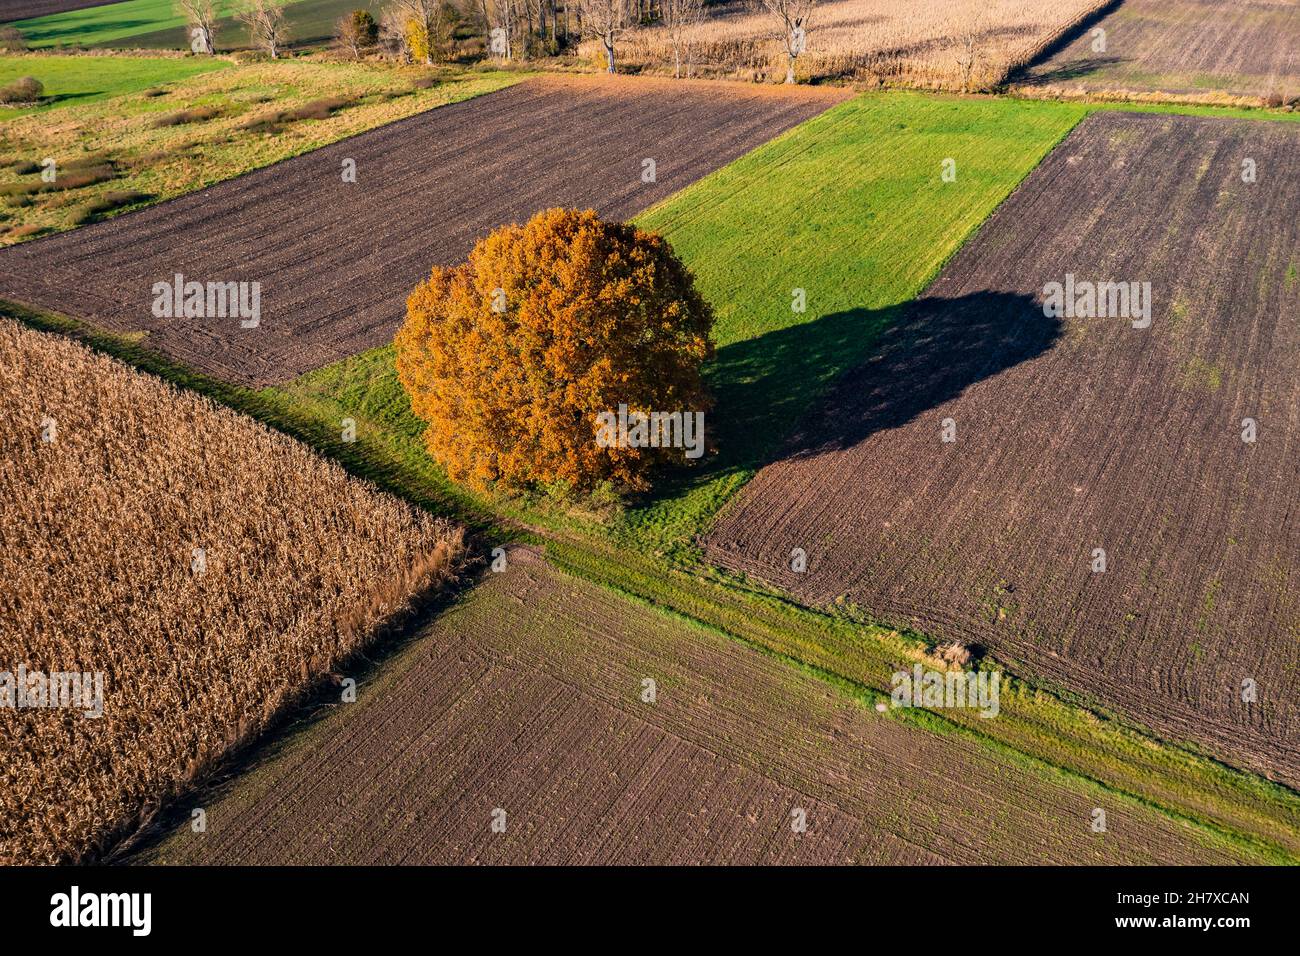 A striking tree with shadows in the midst of different colored fields in the rural area as seen from the air Stock Photo